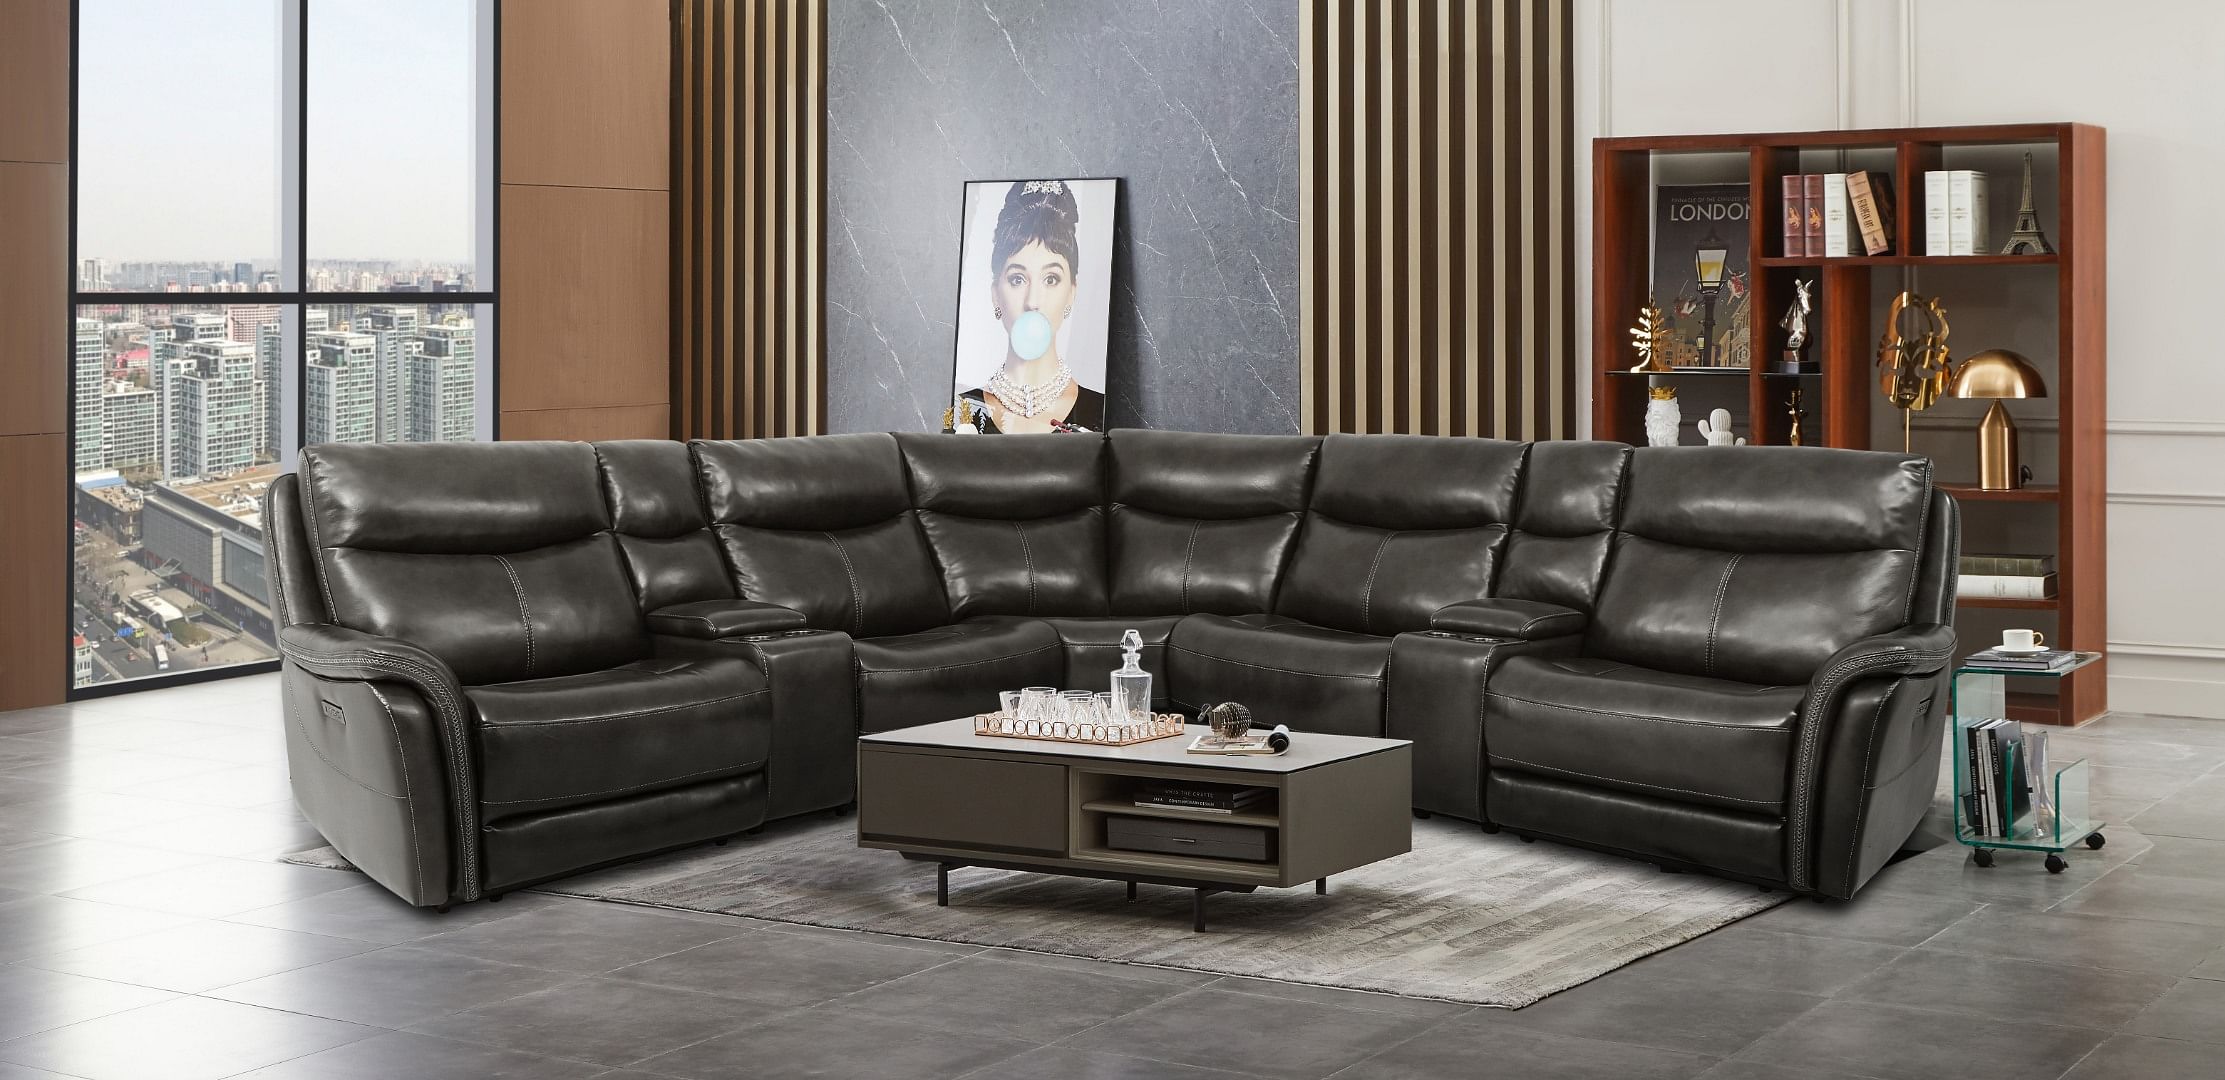 London 7pc Leather Reclining Sectional with 3 Powe...